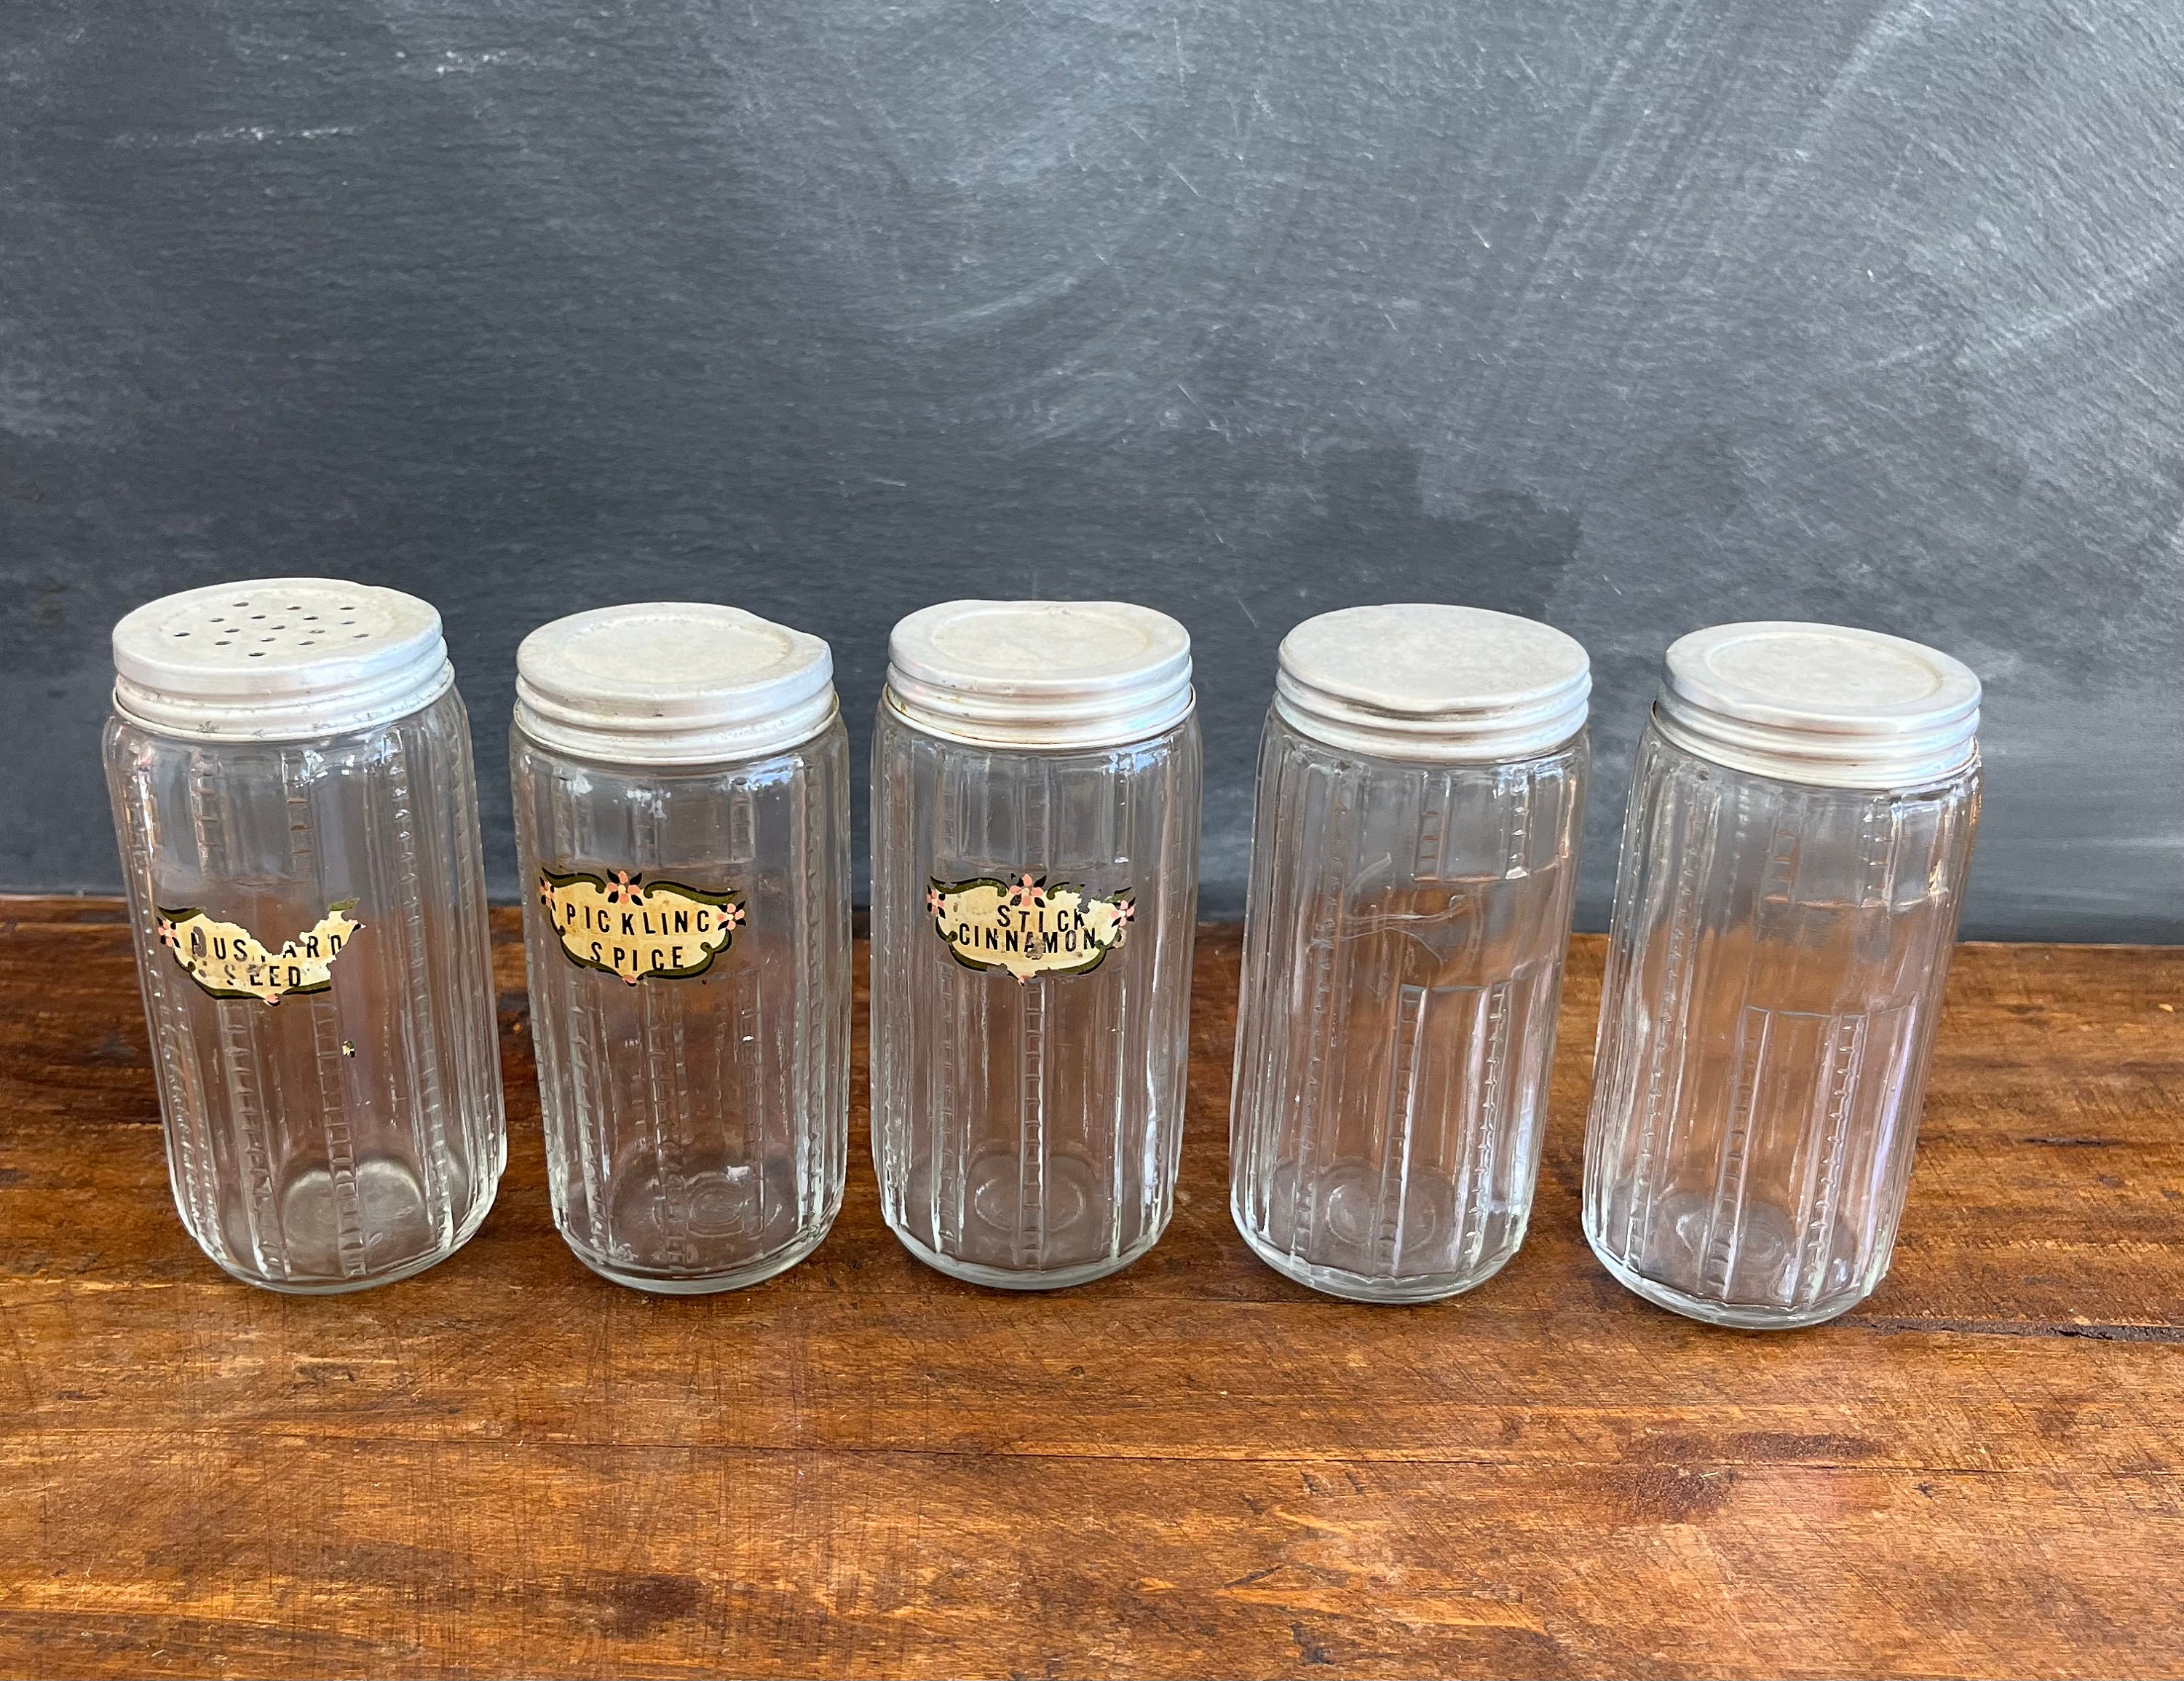 craft supplies storage or spice jars, old glass bottles with metal